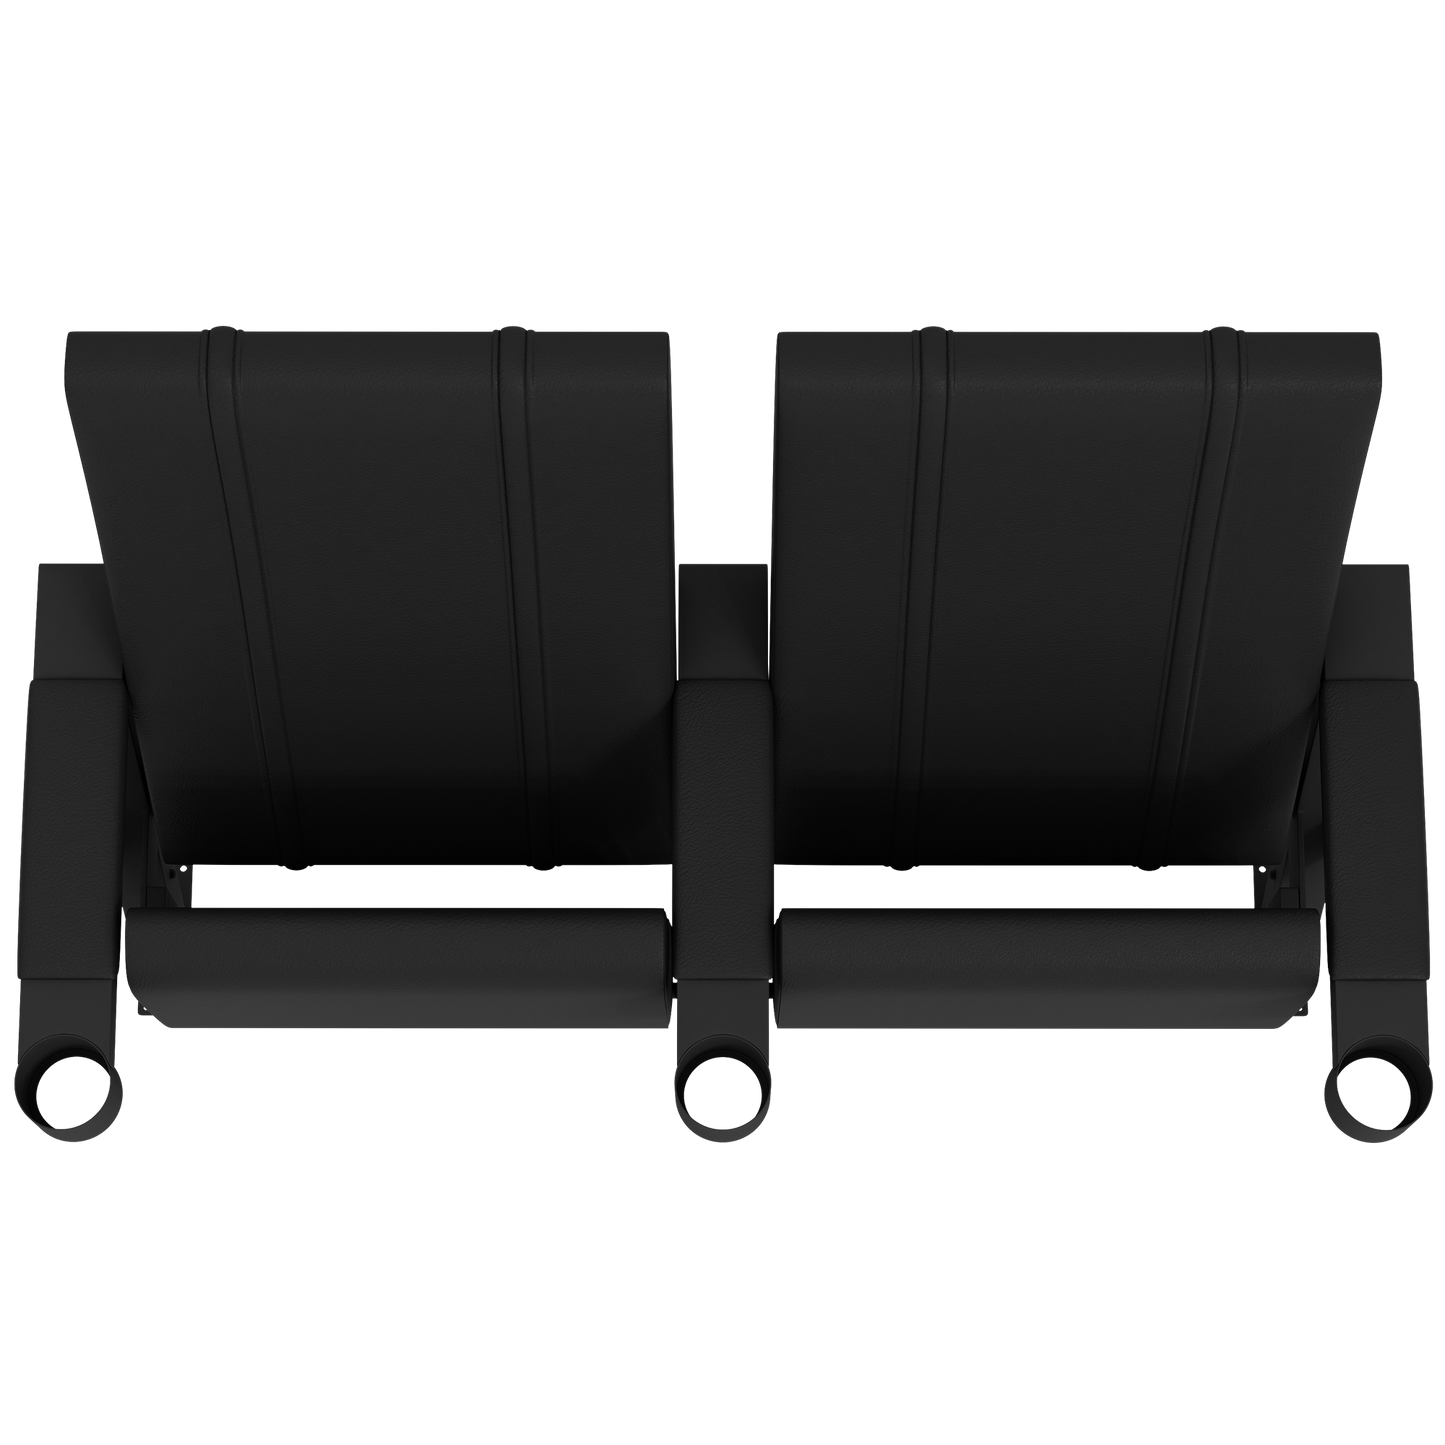 SuiteMax 3.5 VIP Seats with Houston Rockets Logo